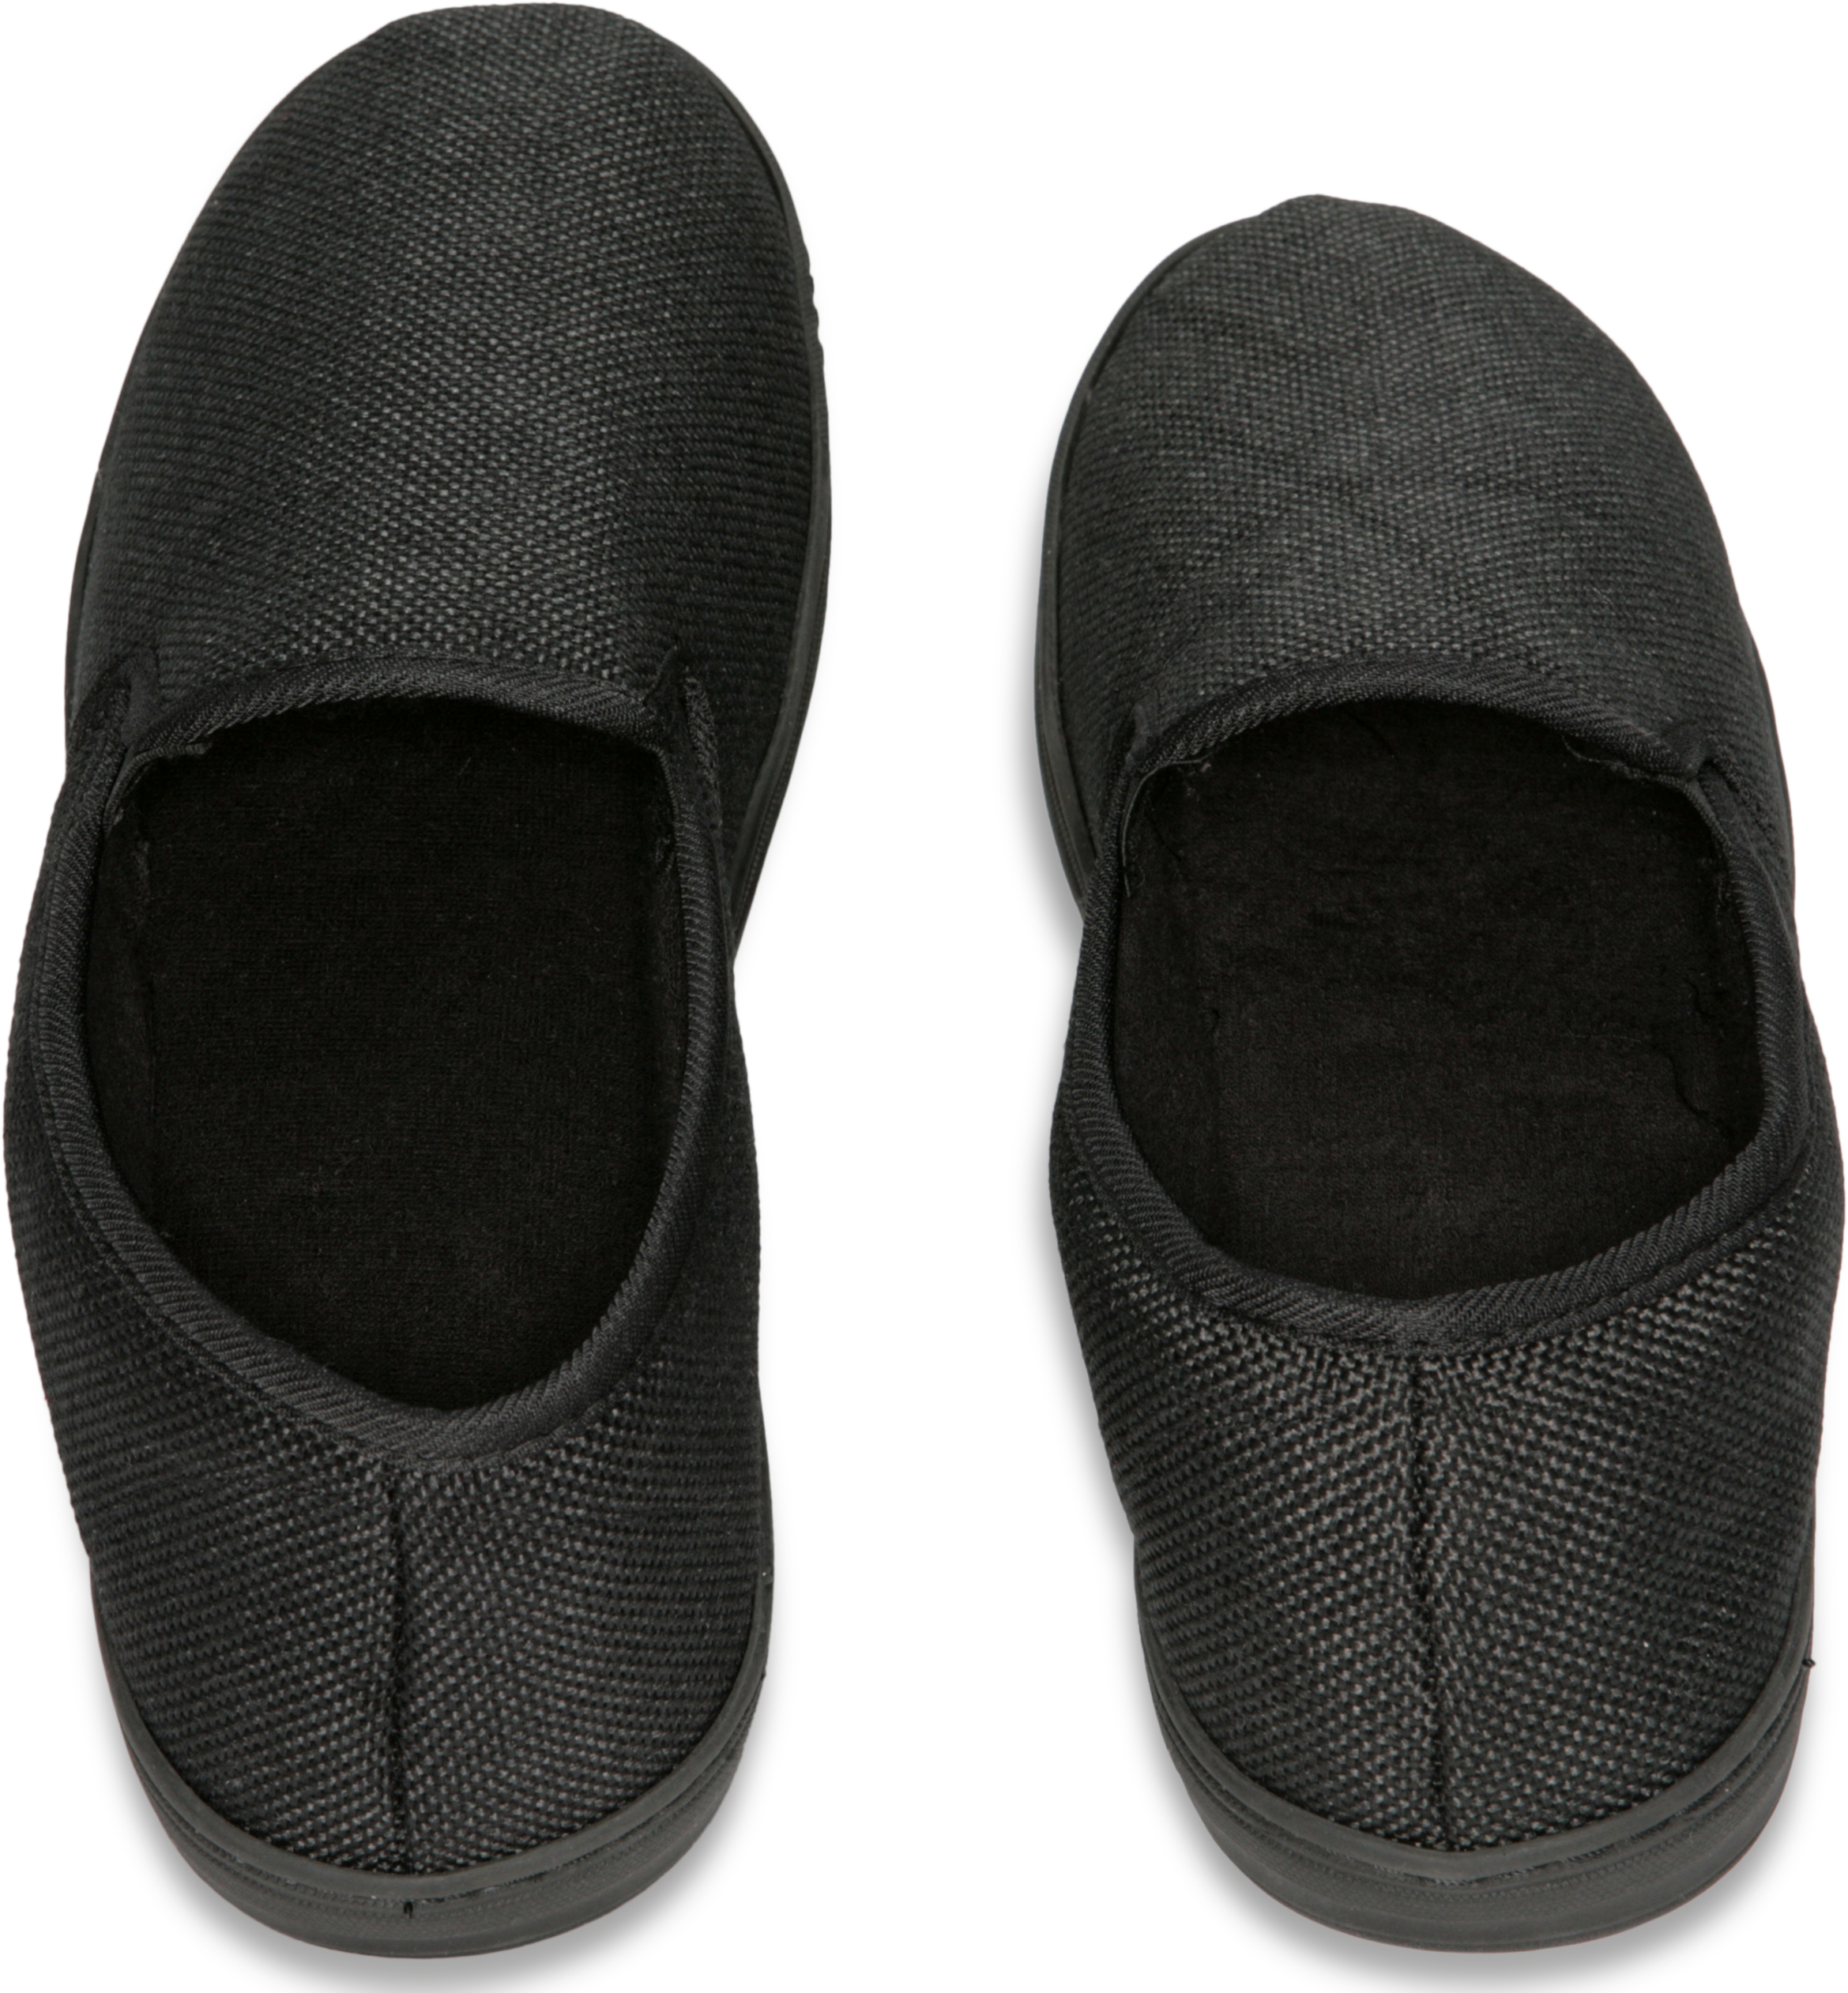 Deluxe Comfort Men's Memory Foam Slipper, Size 9-10 - Suede Vamp Checkered Lining - Memory Foam Insole - Strong TPR Outsole - Mens Slippers, Black - image 3 of 5